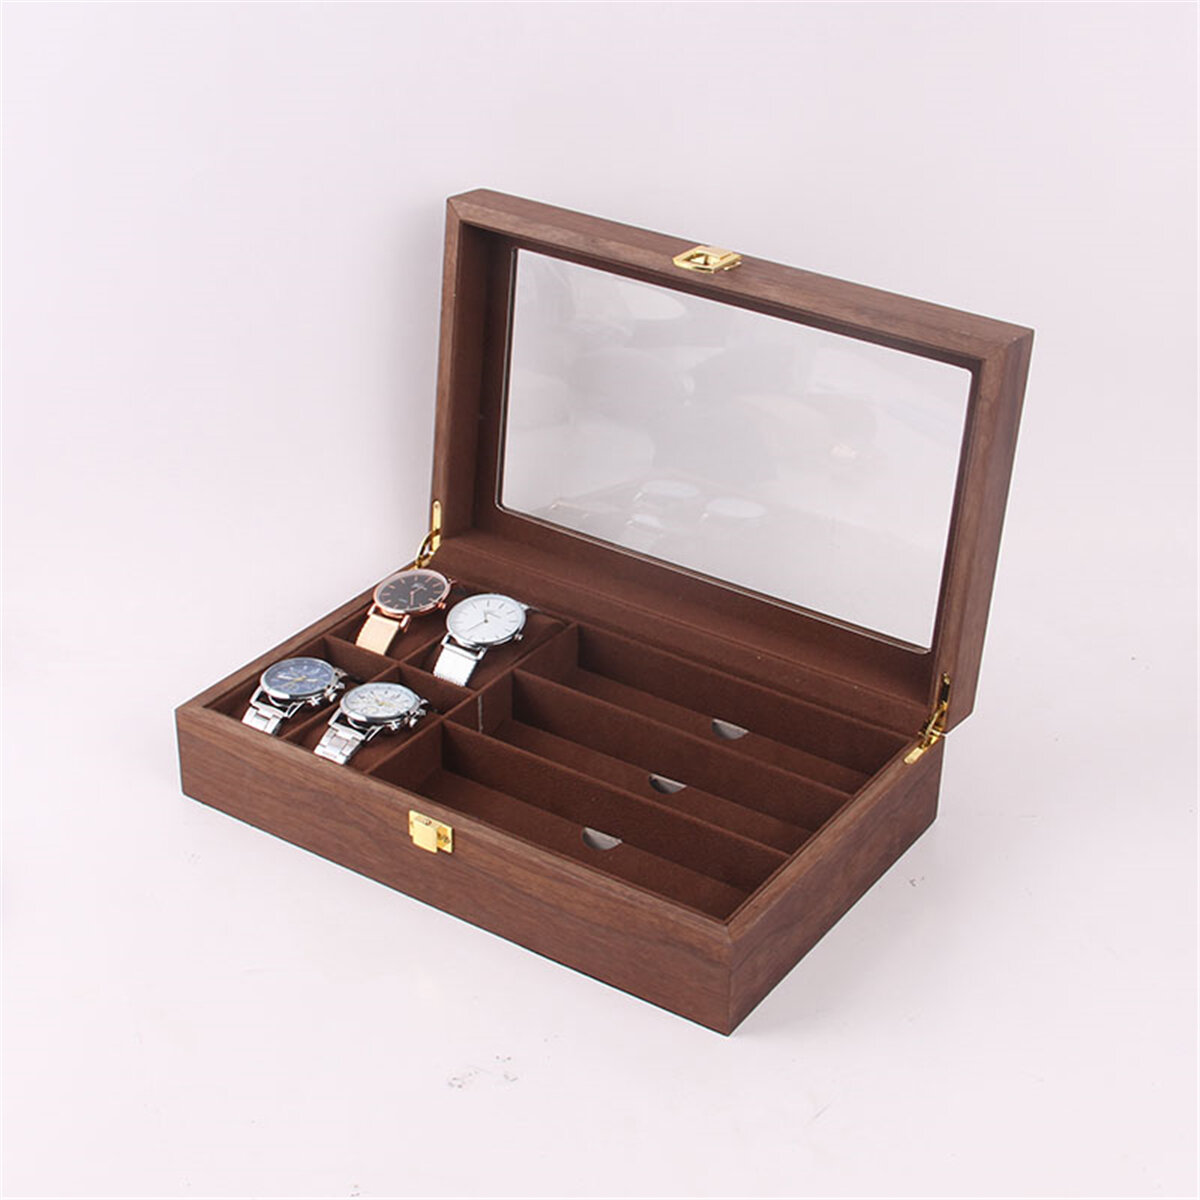 Image of Woden Watch Boxes Necklace Jewelry Watch Display Box